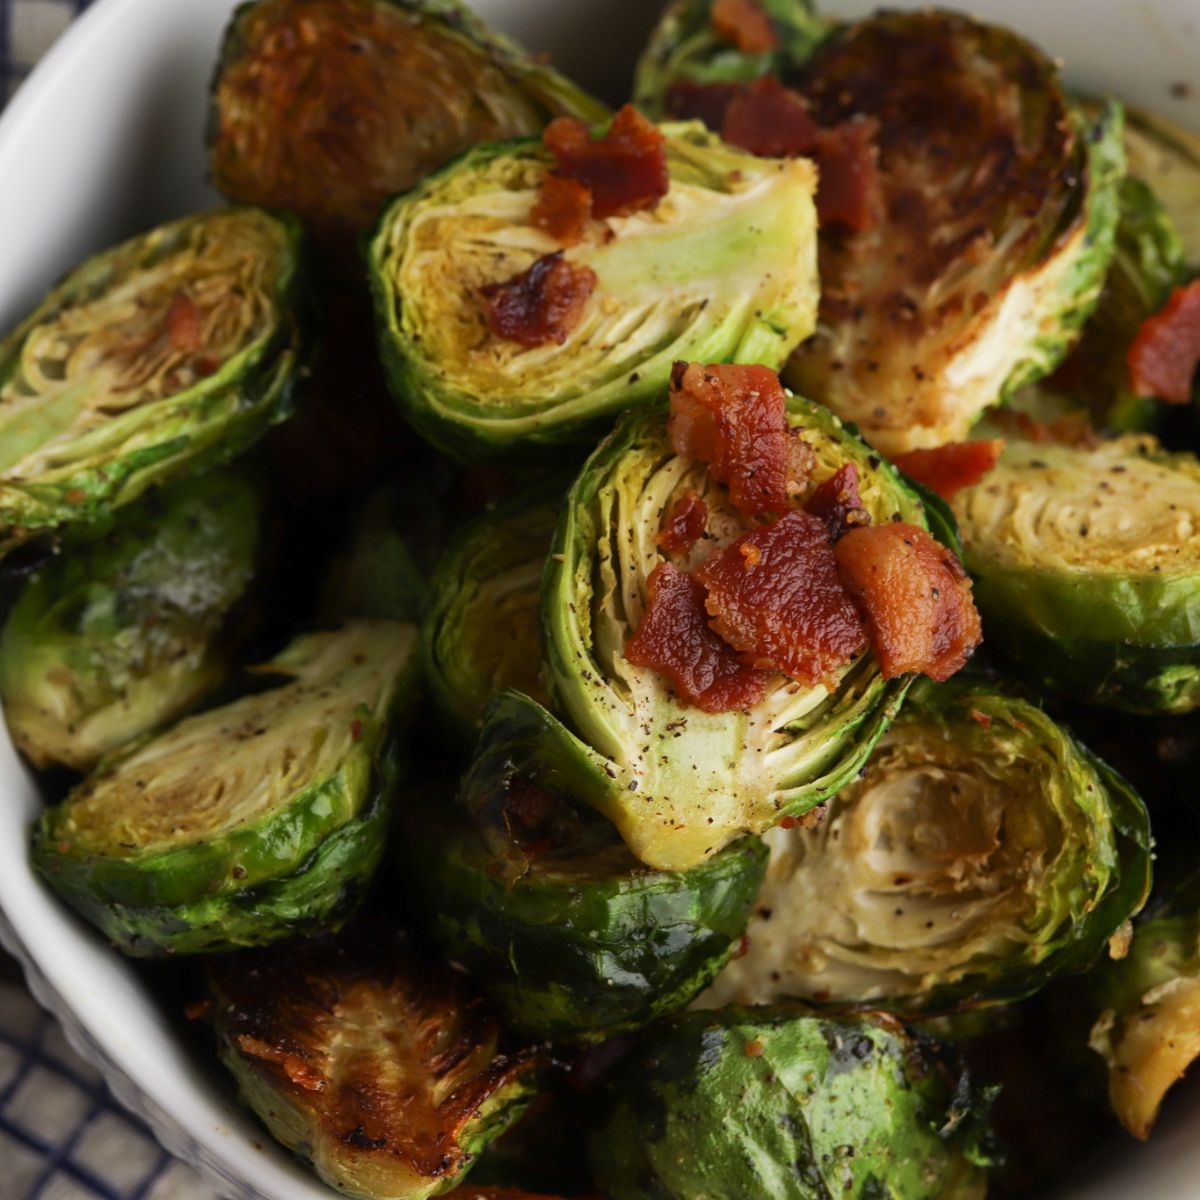 Roasted brussels sprouts with bacon in a bowl.